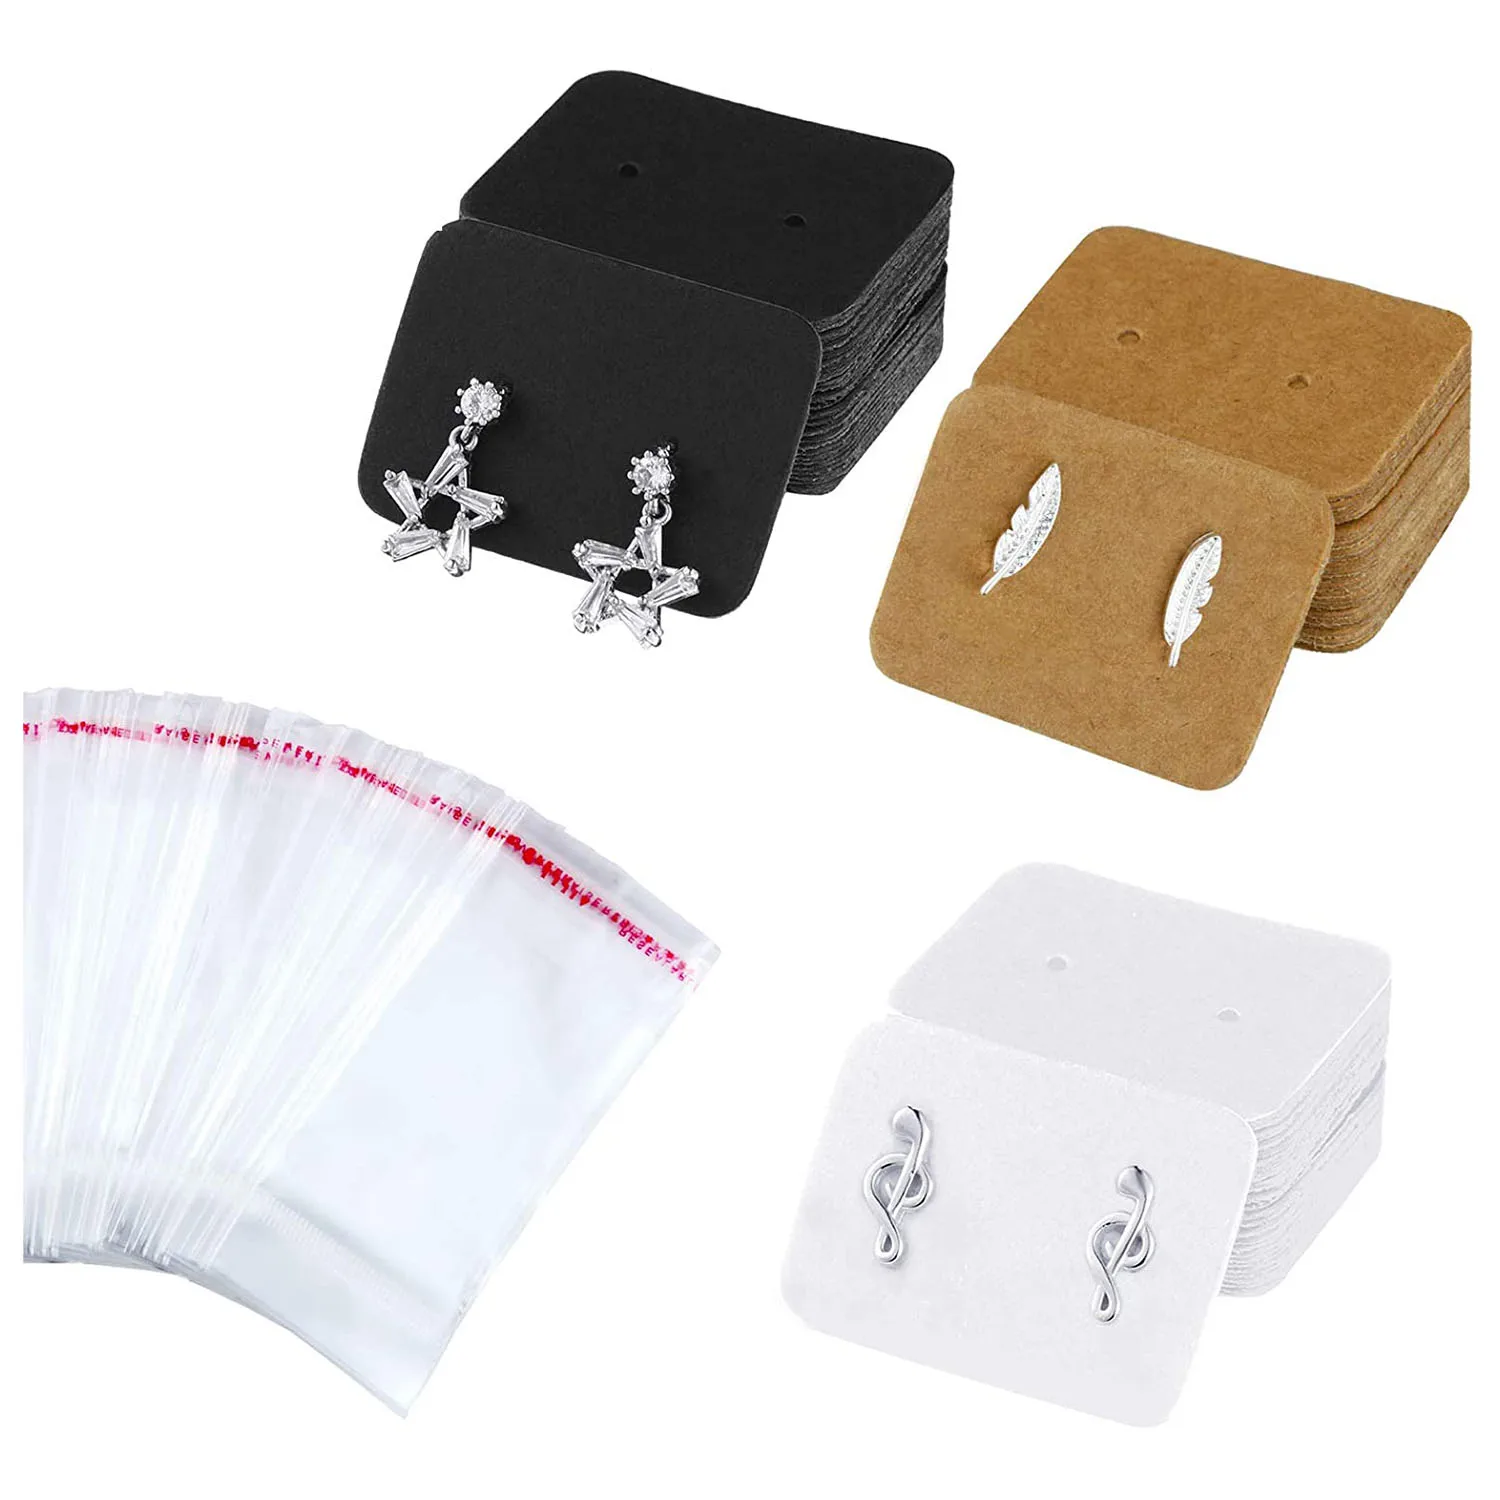 50 pcs Earring Cards Earring Display Cards with Clear Cellophane Bags Plastic Earring Storage Containers for Jewelry Display business card holder organizer name stand plastic desk shelf cards leaflet clear